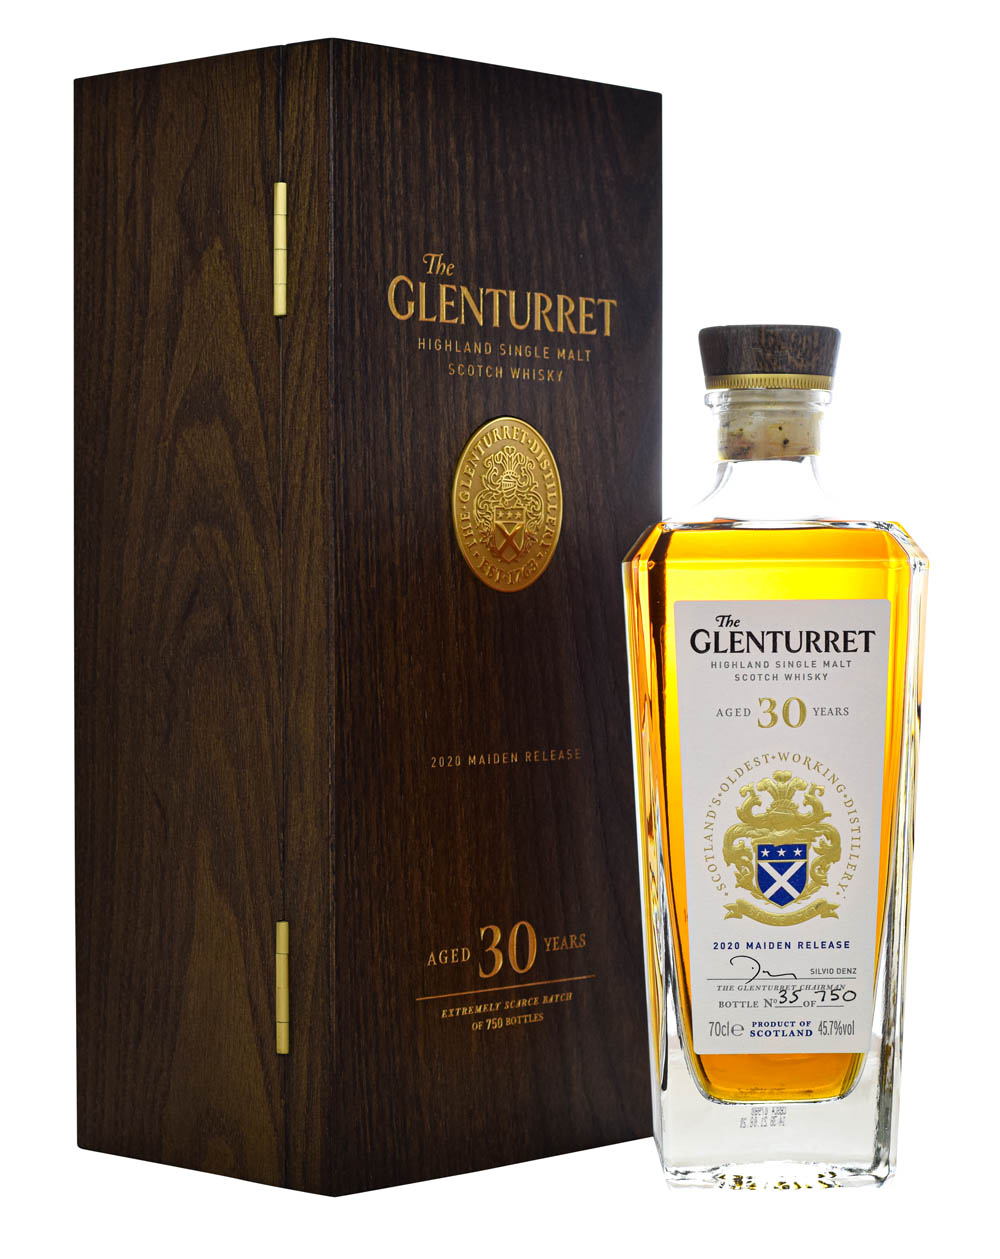 Glenturret 30 Years Old 2020 Maiden Release Box Musthave Malts MHM